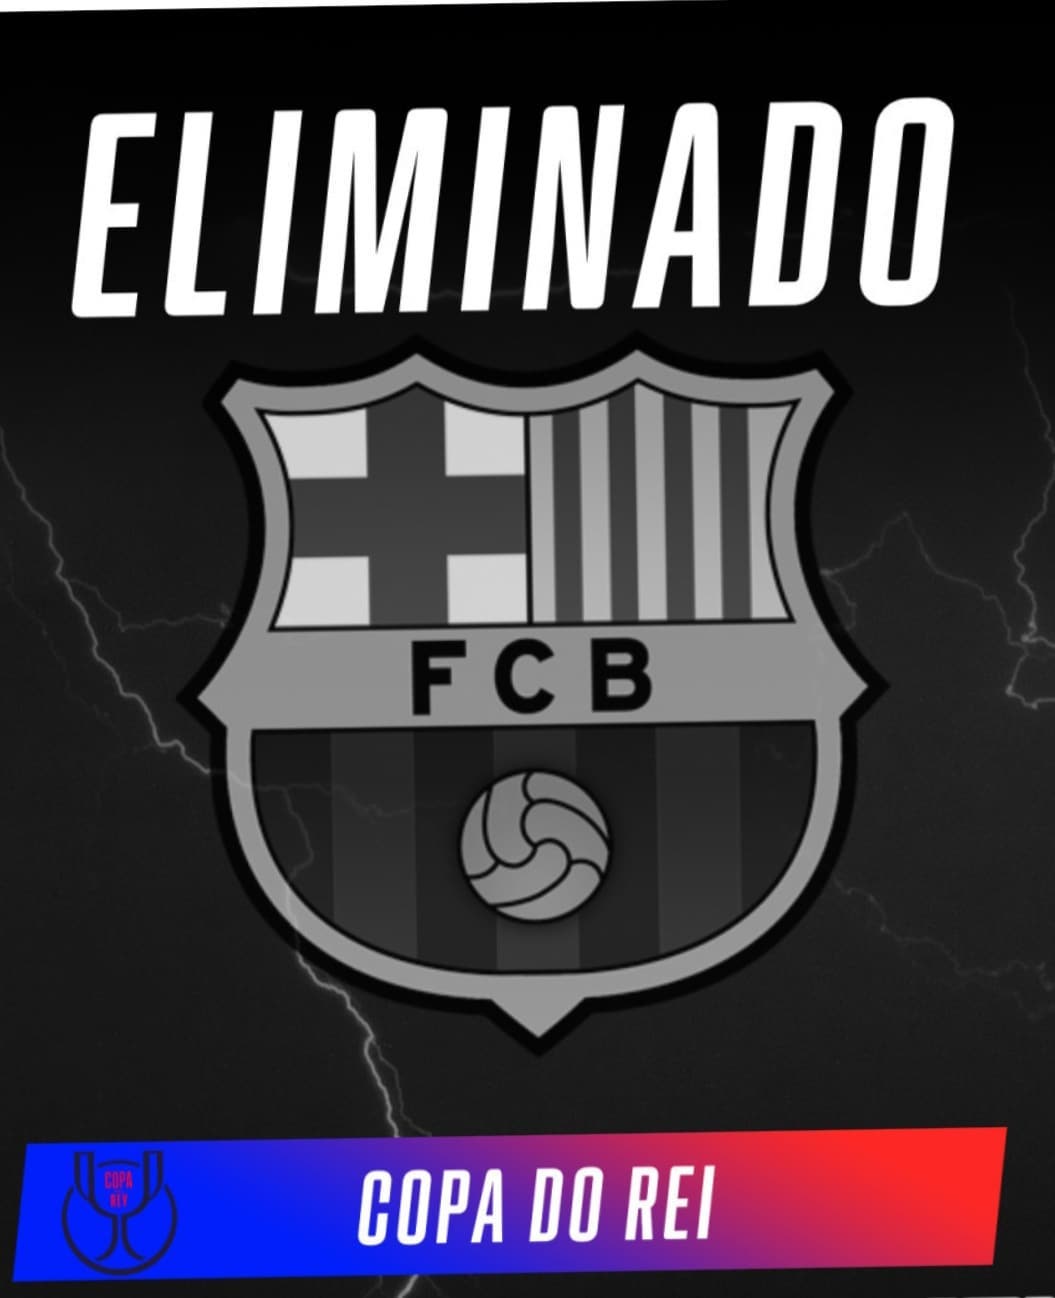 Graphic illustration about Barcelona’s elimination from Copa del Rey, with the words ‘Eliminado FCB’